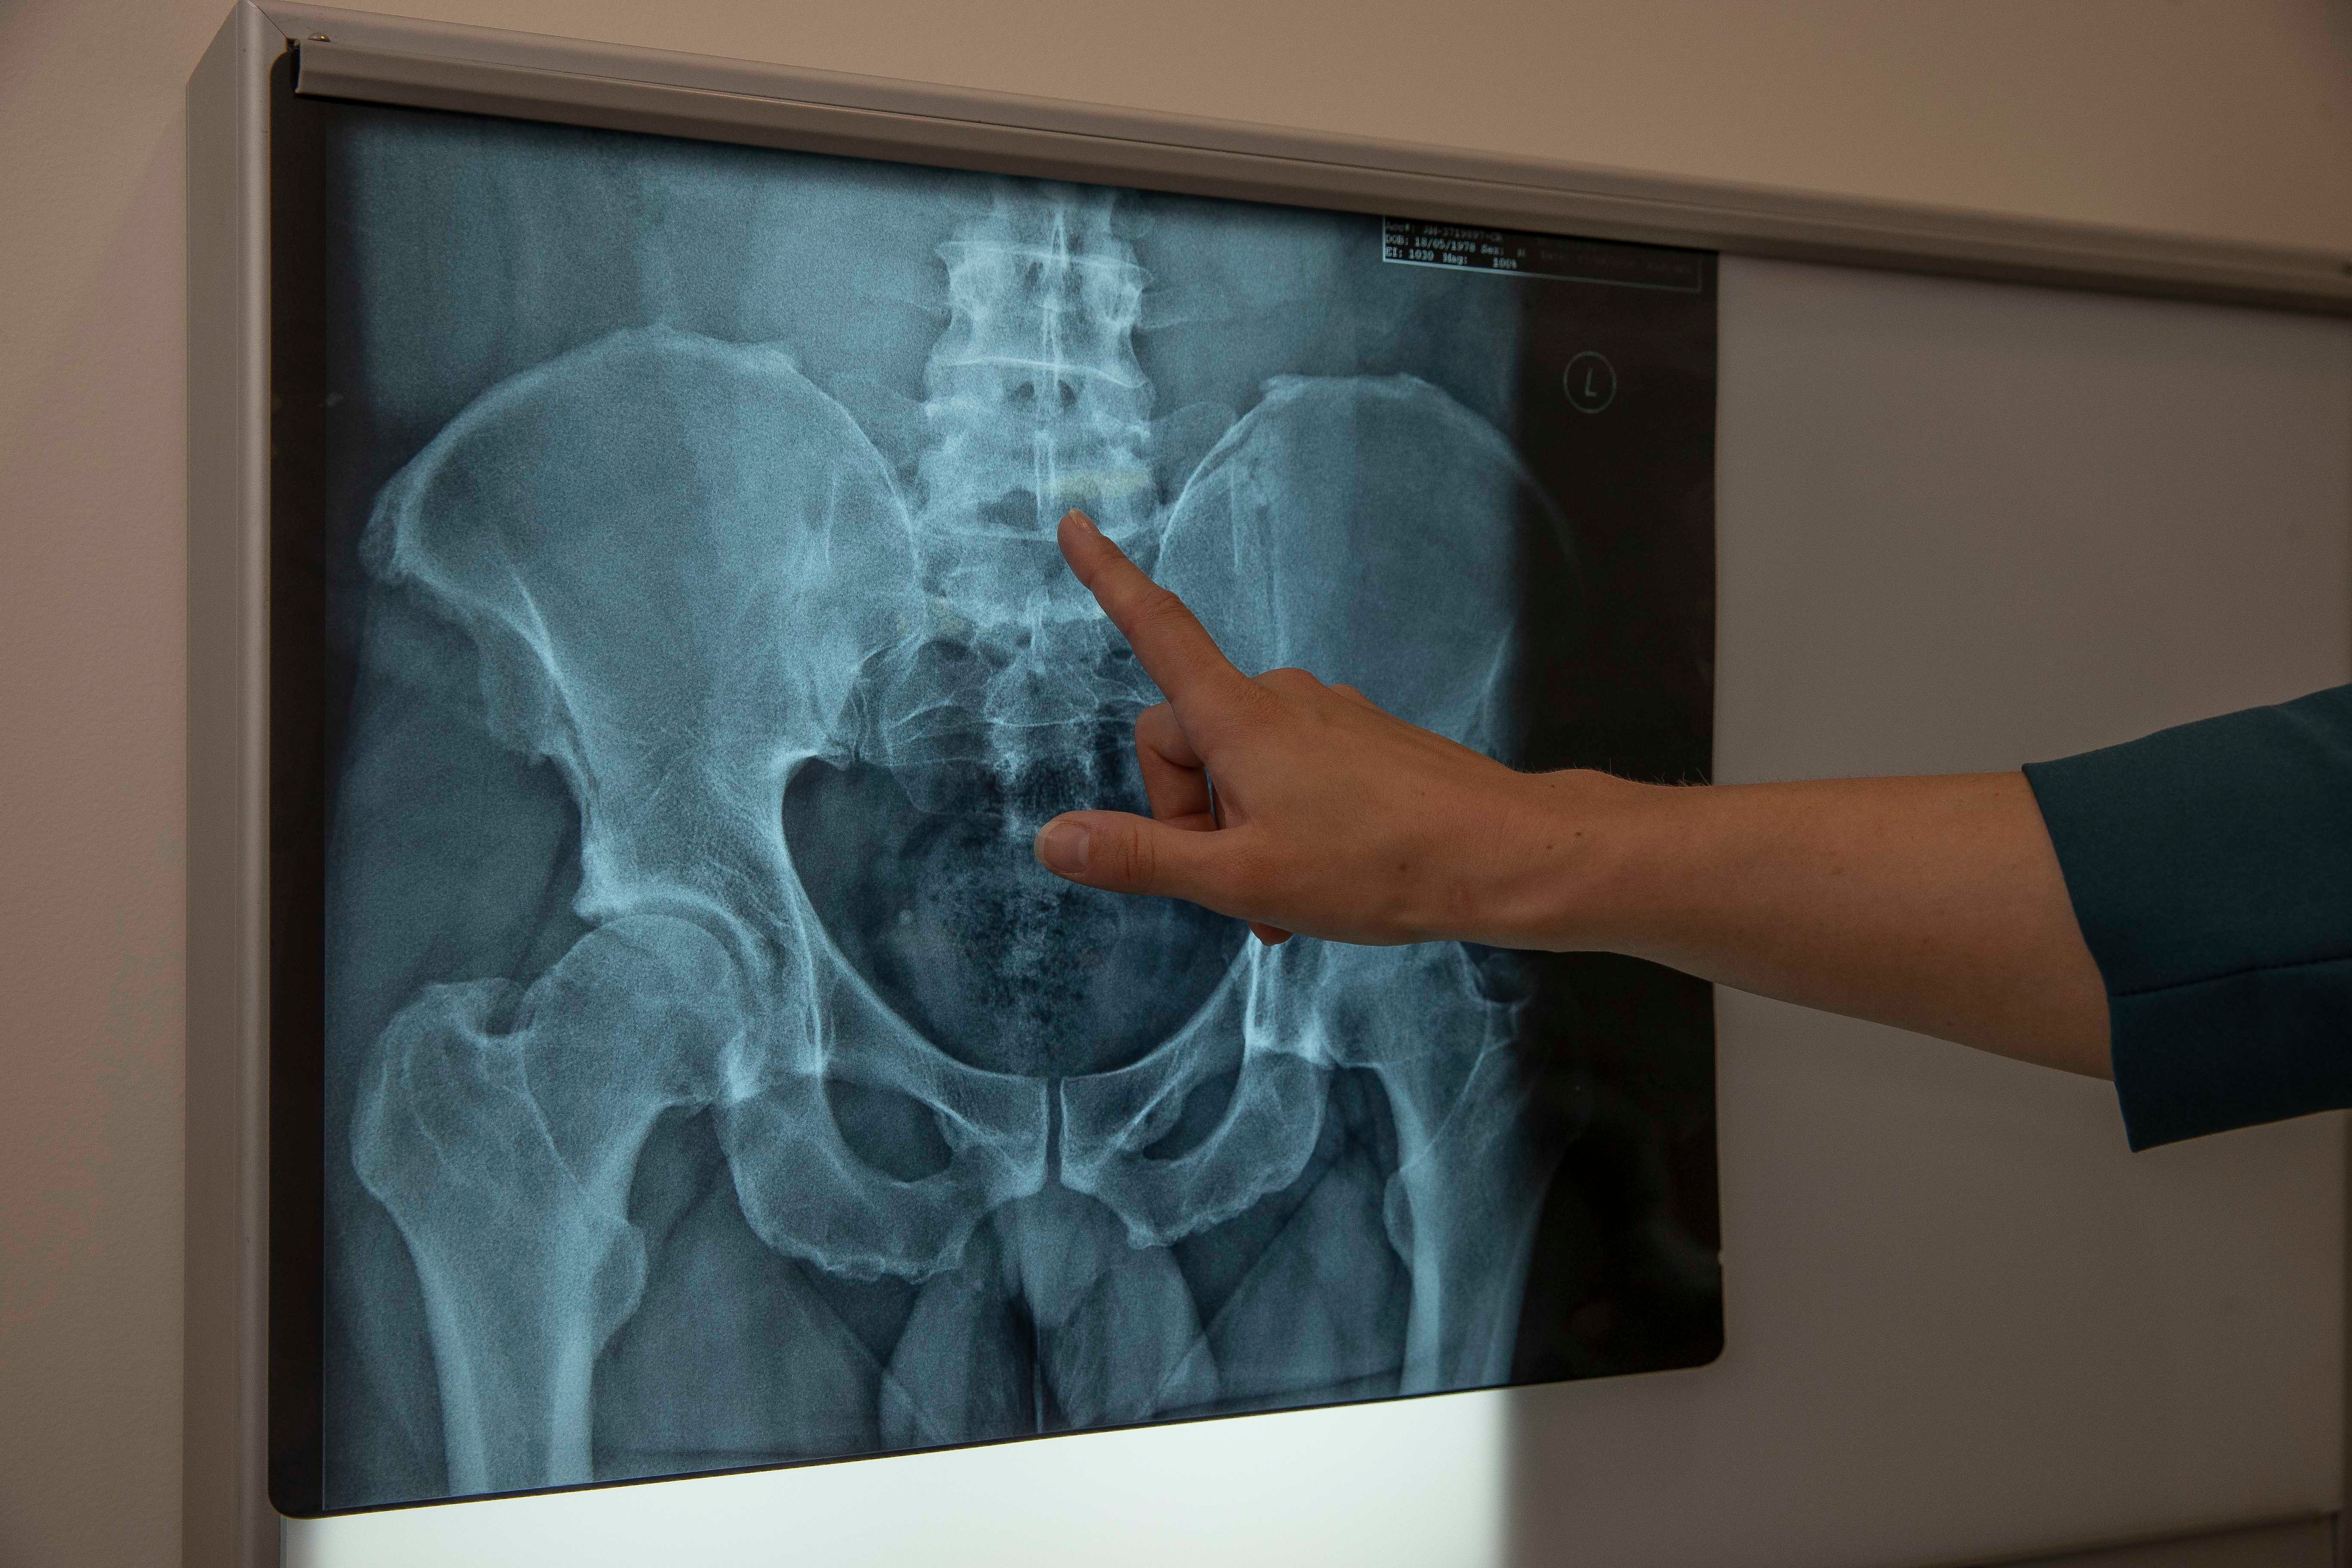 Spinal cord stimulation doesn t help with back pain says new review - The  University of Sydney